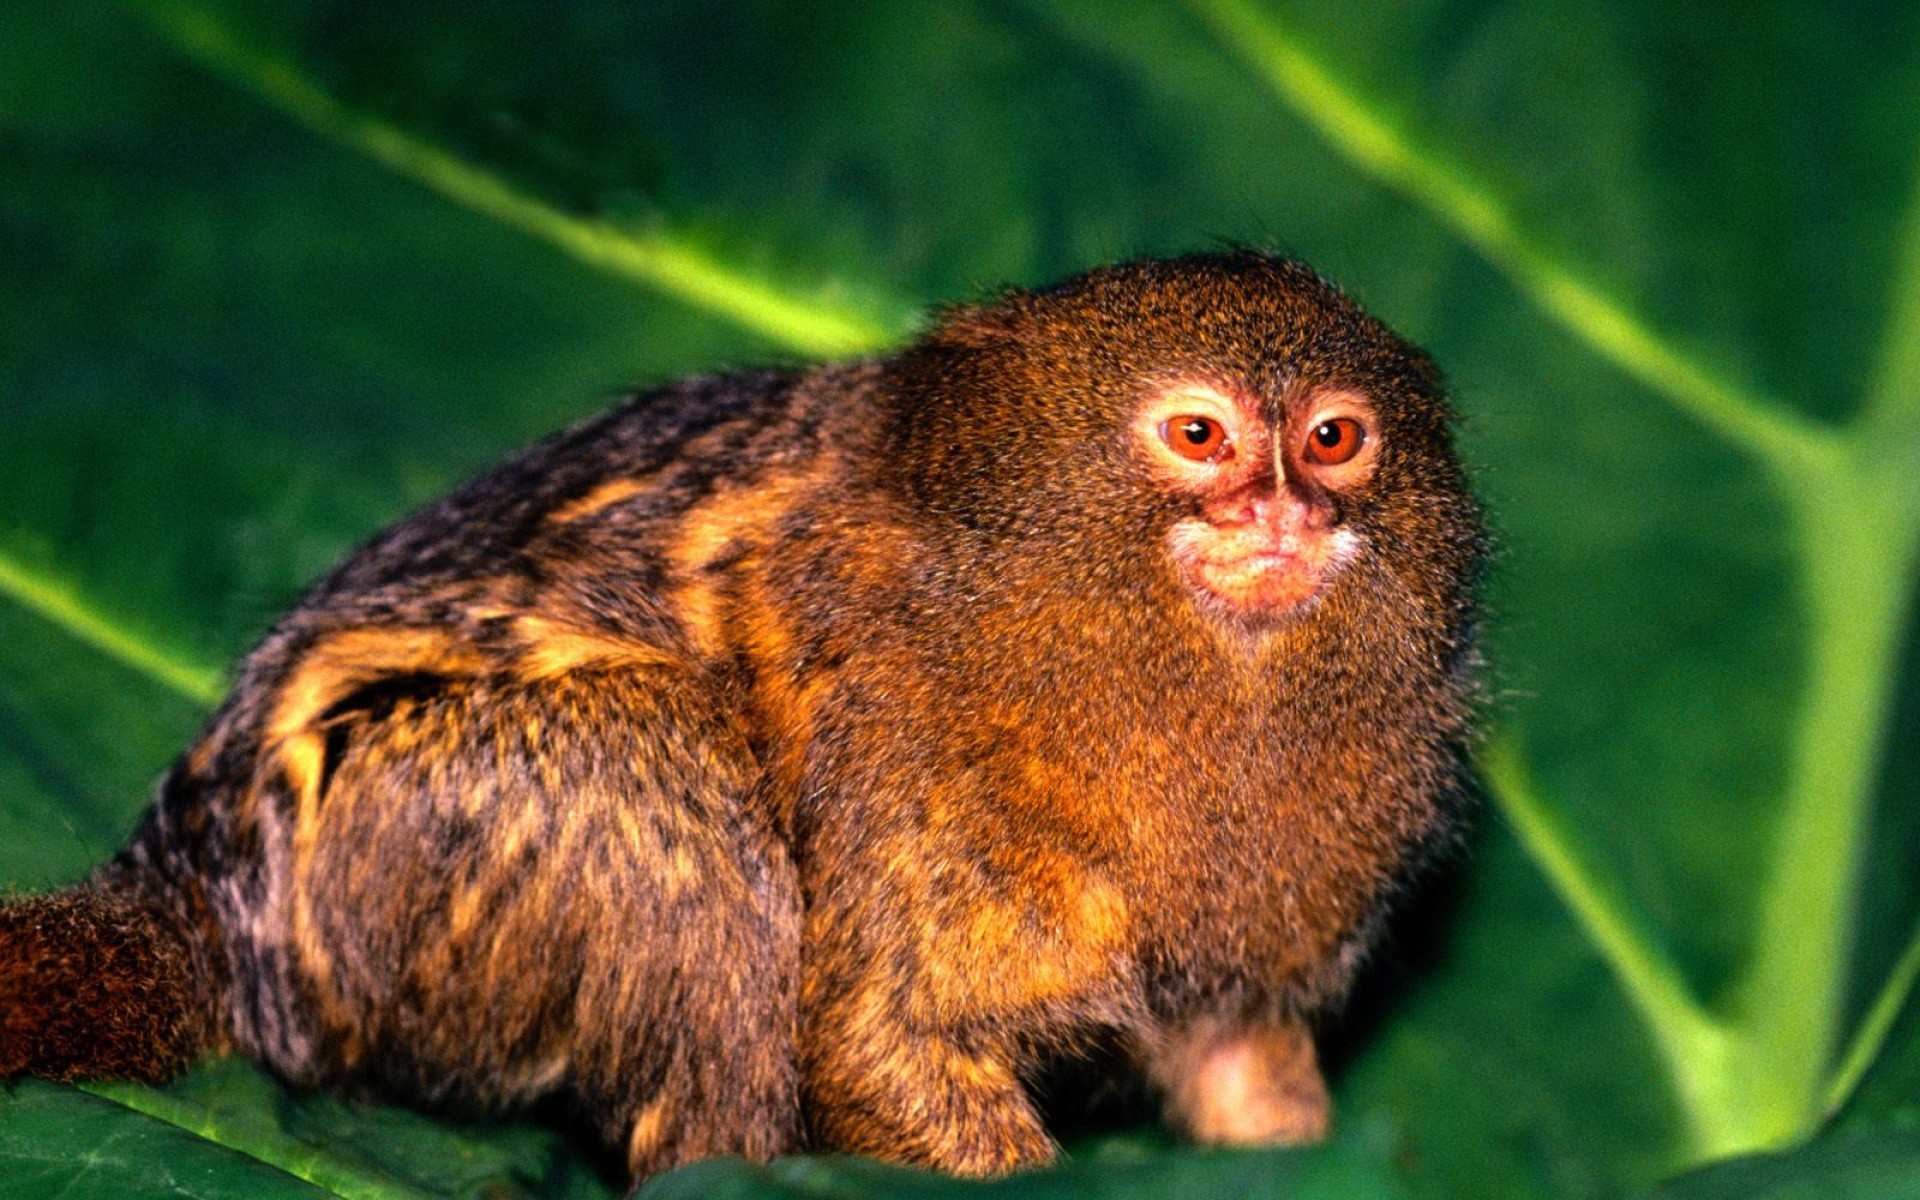 The average size of their territory is between 25 and 100 acres, and they will defend their territory against other marmosets.